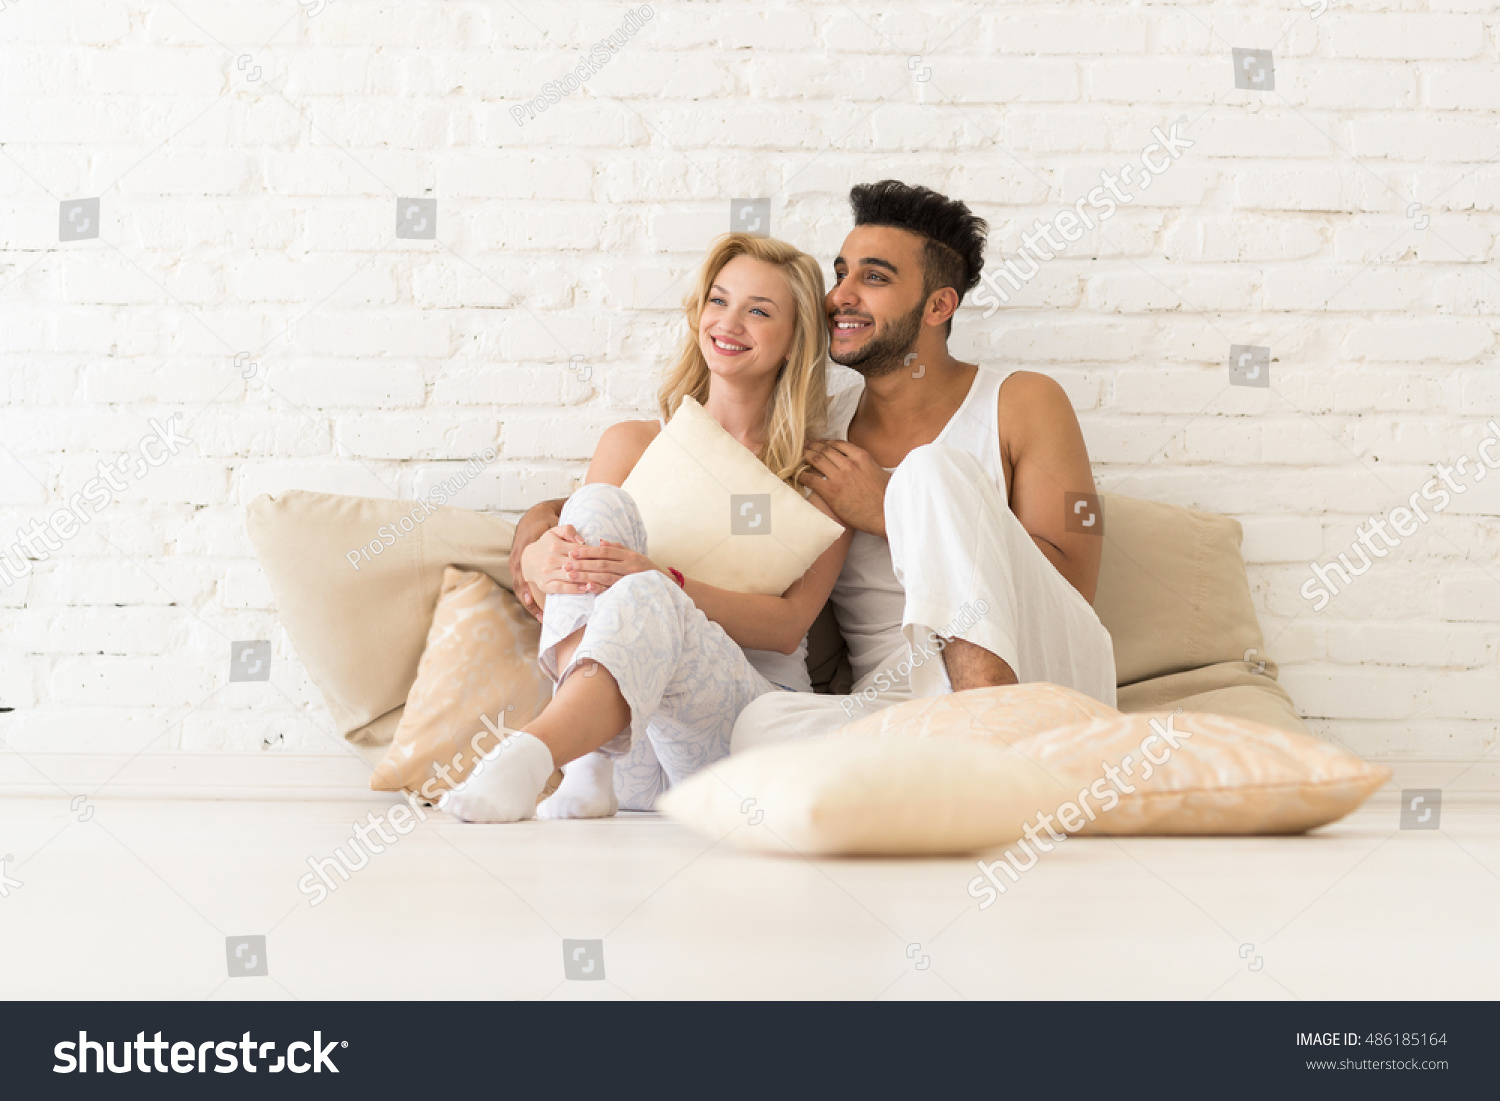 Young Couple Sit On Pillows Floor Stock Photo 486185164 Shutterstock